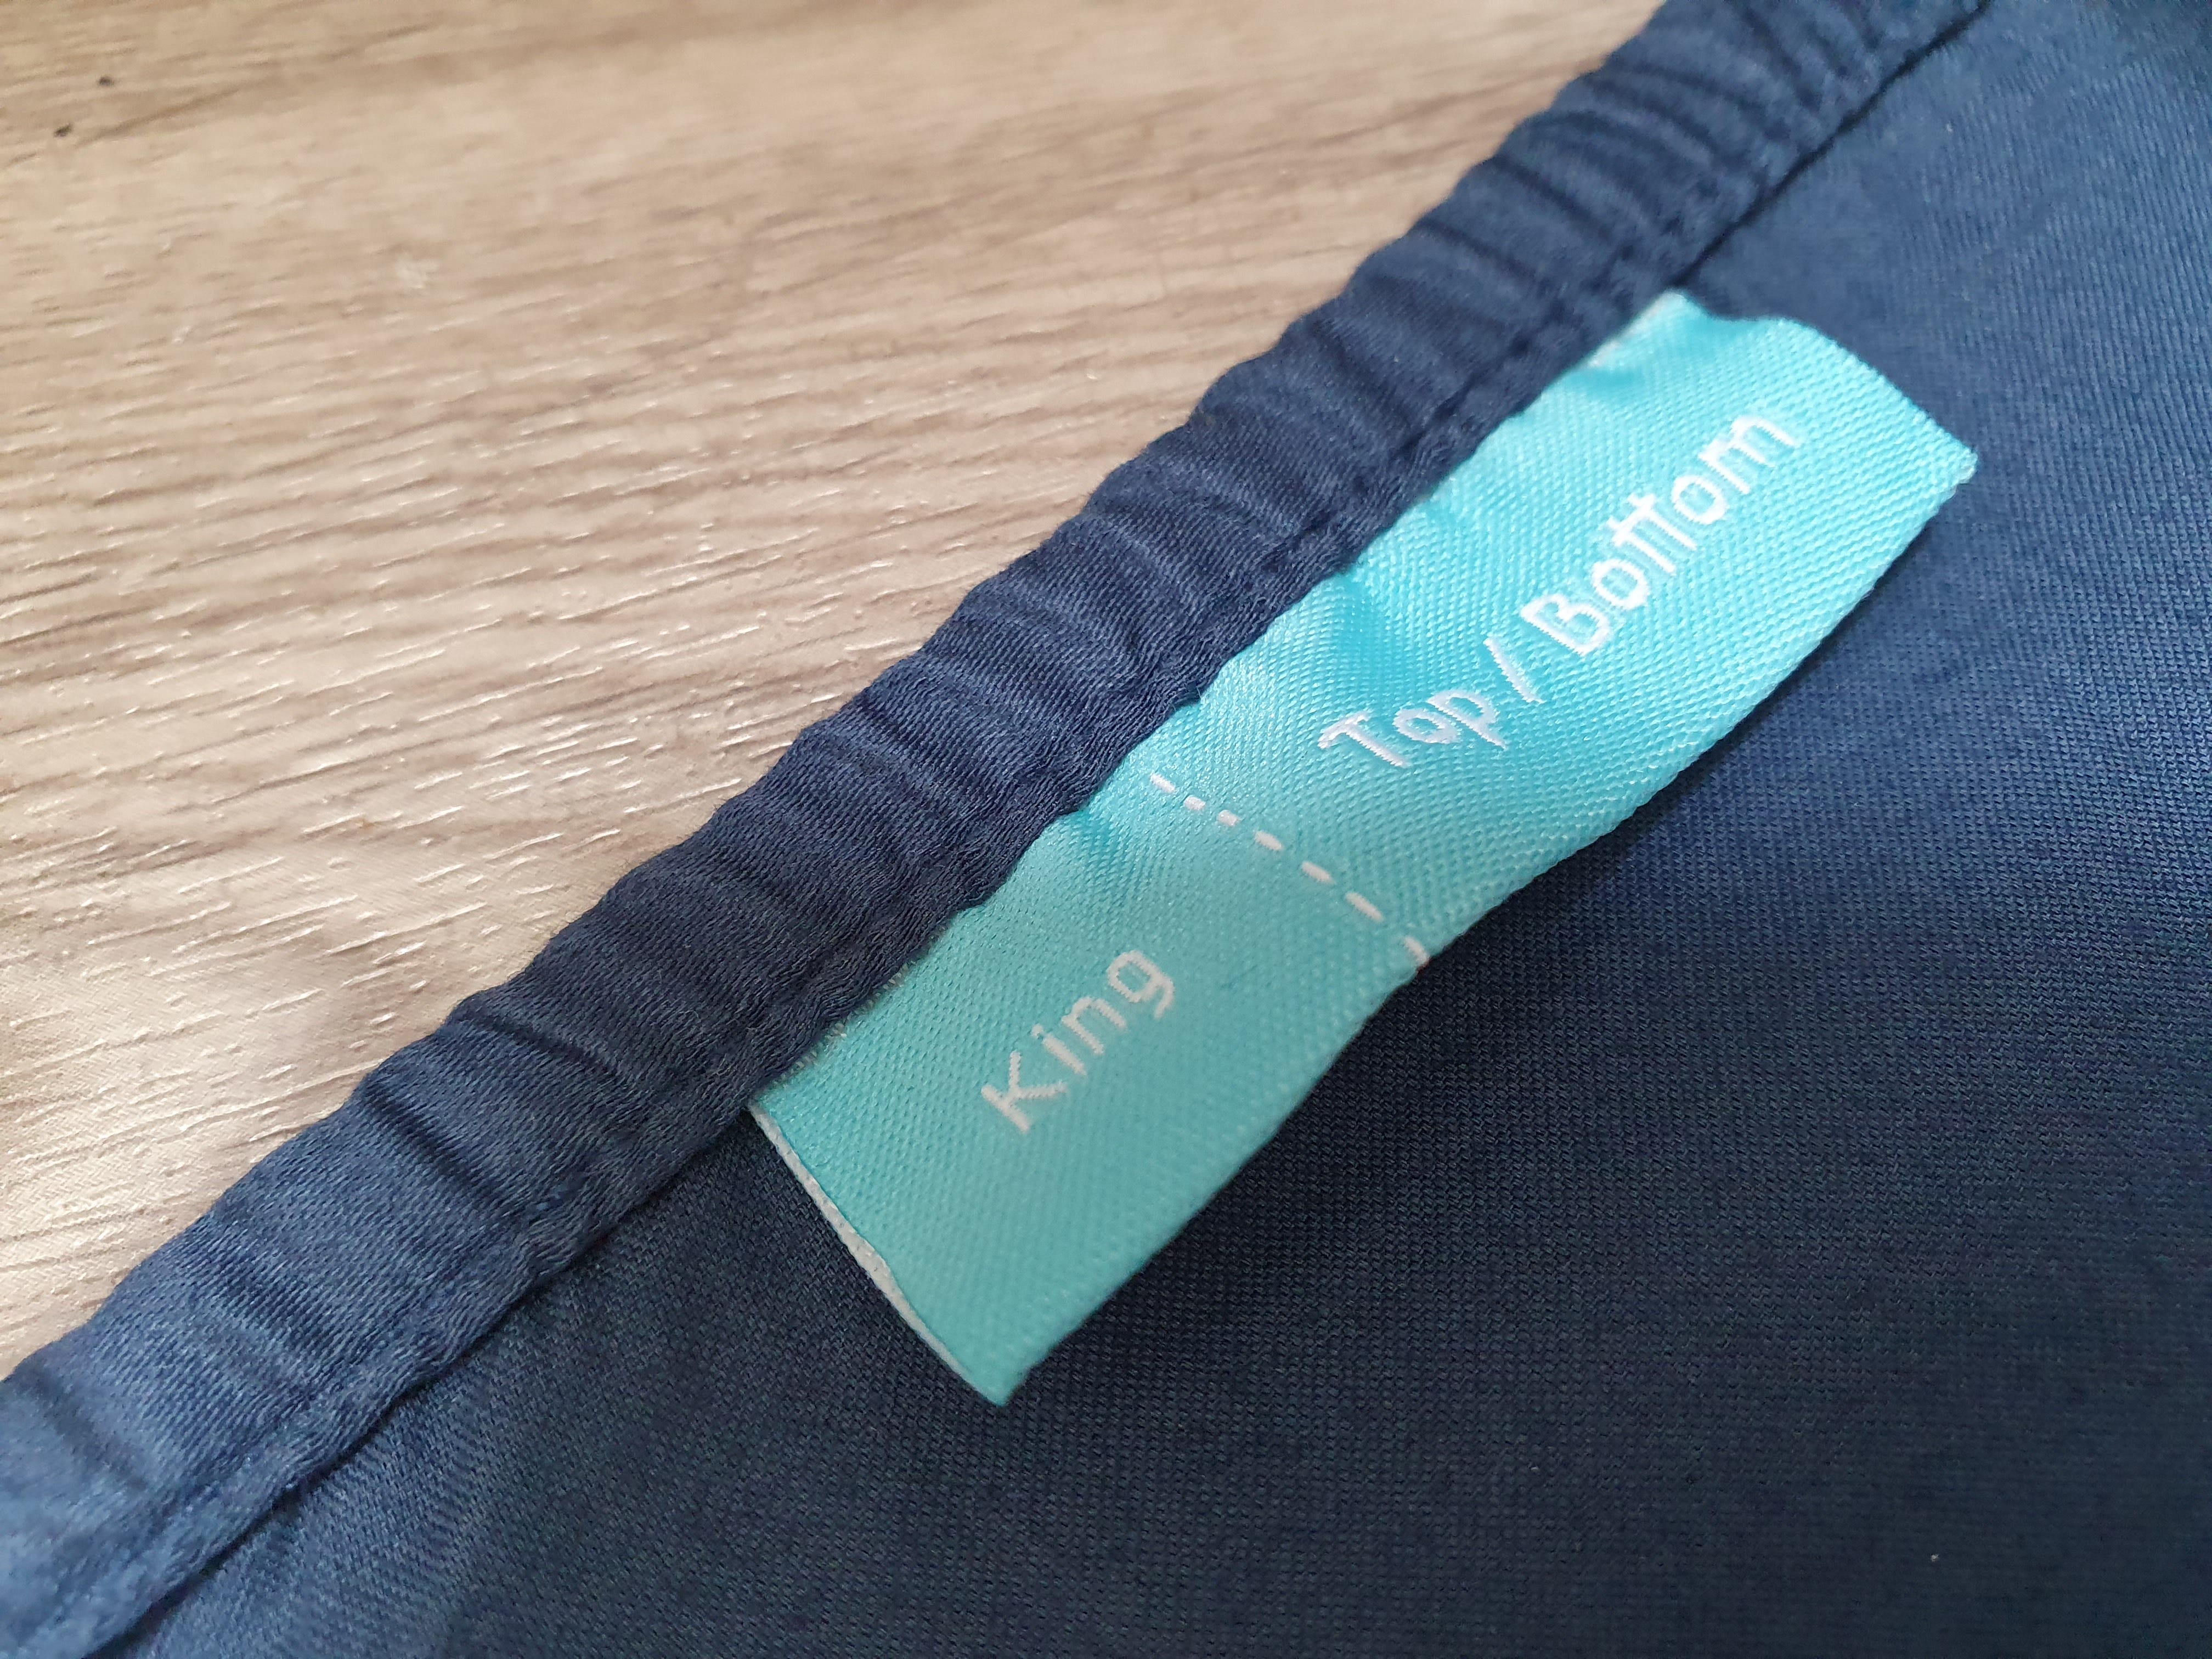 Intelligent tags to know the size and direction to put on your Kapas bed sheet